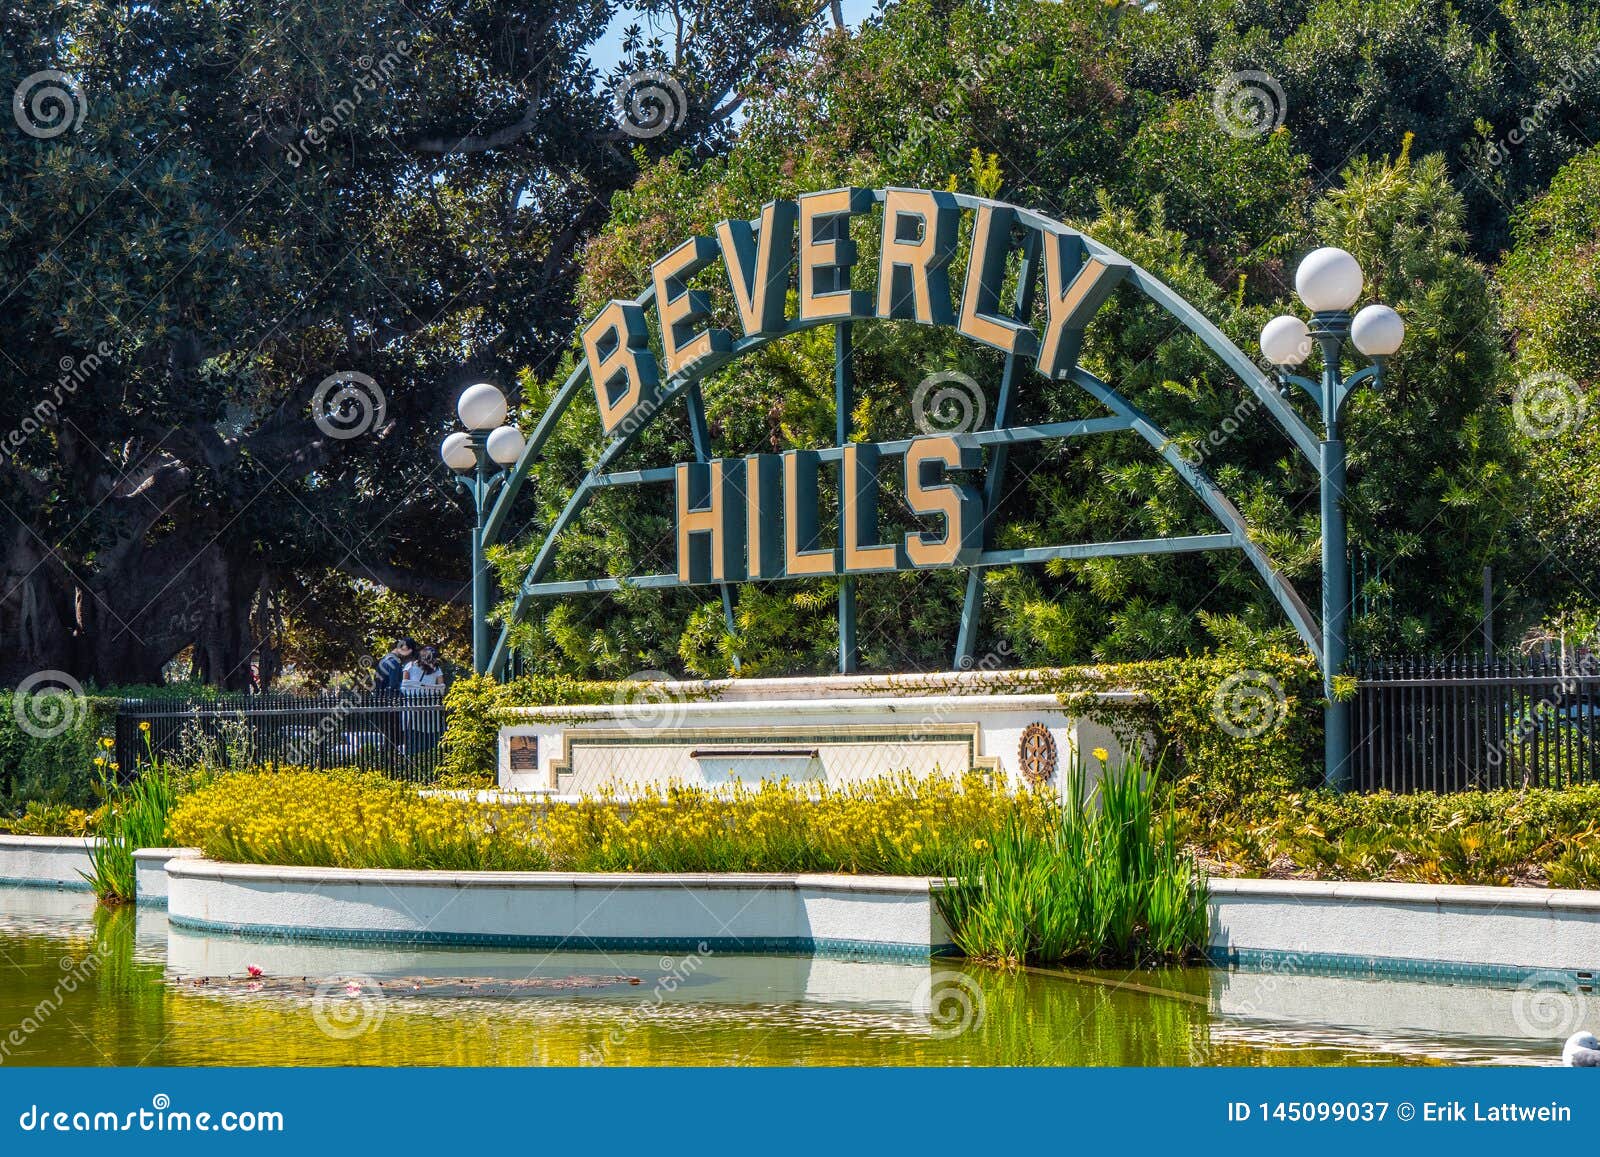 Beverly Hills Gardens Park In The City Of Los Angeles Editorial